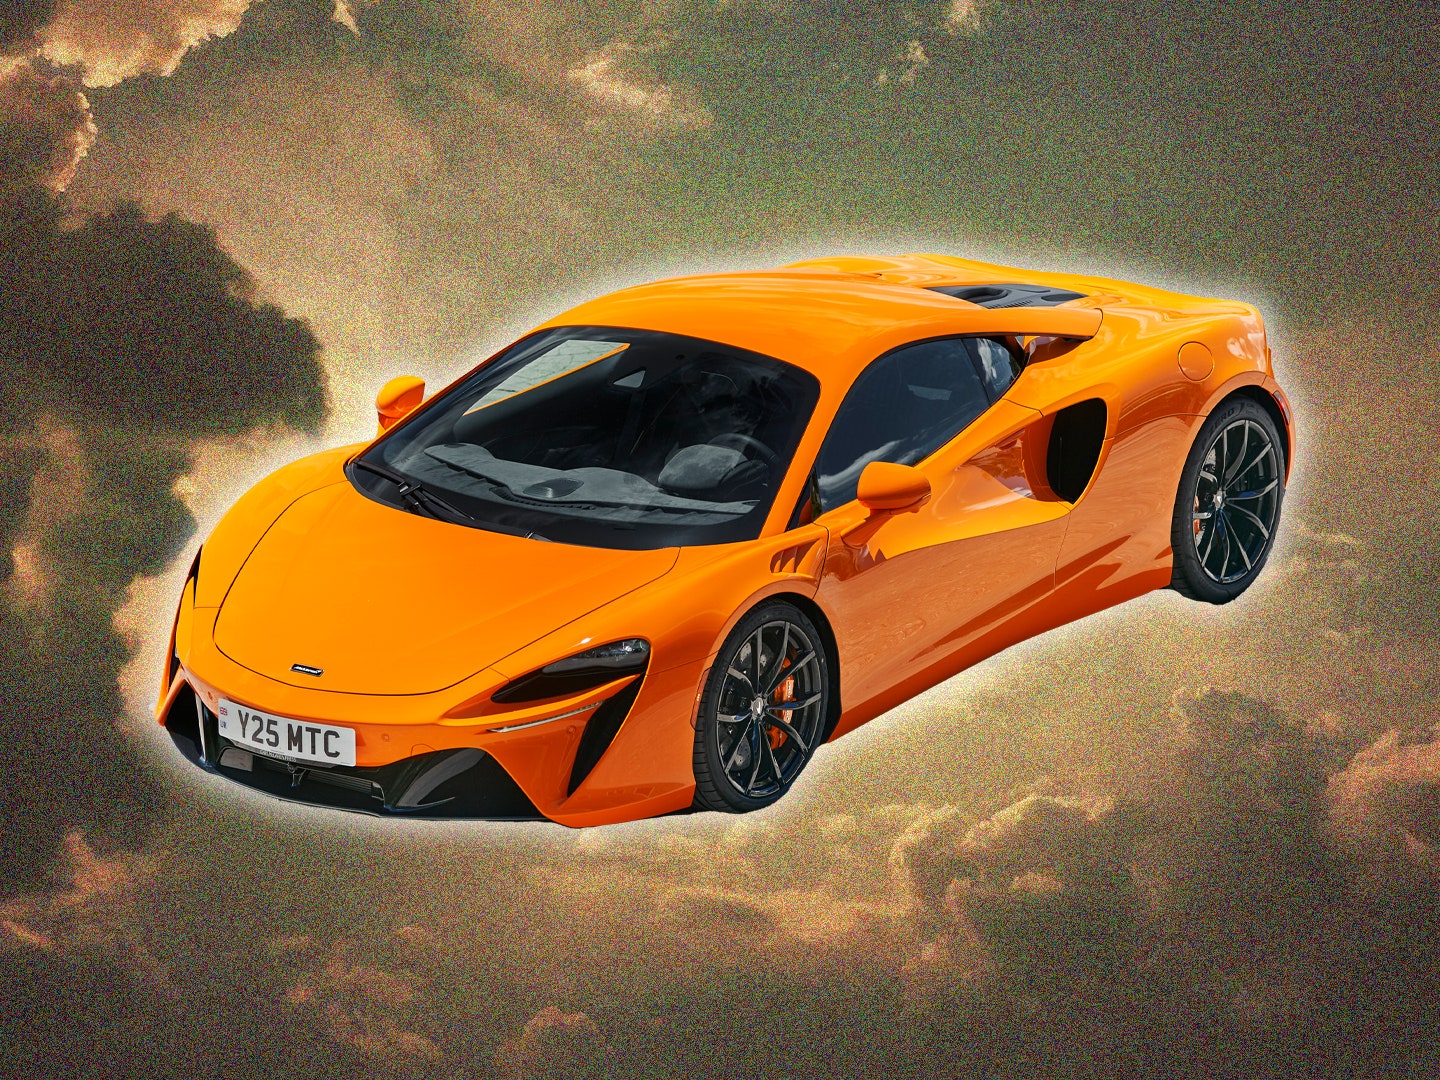 The new McLaren Artura is an unexpectedly brilliant supercar on many levels